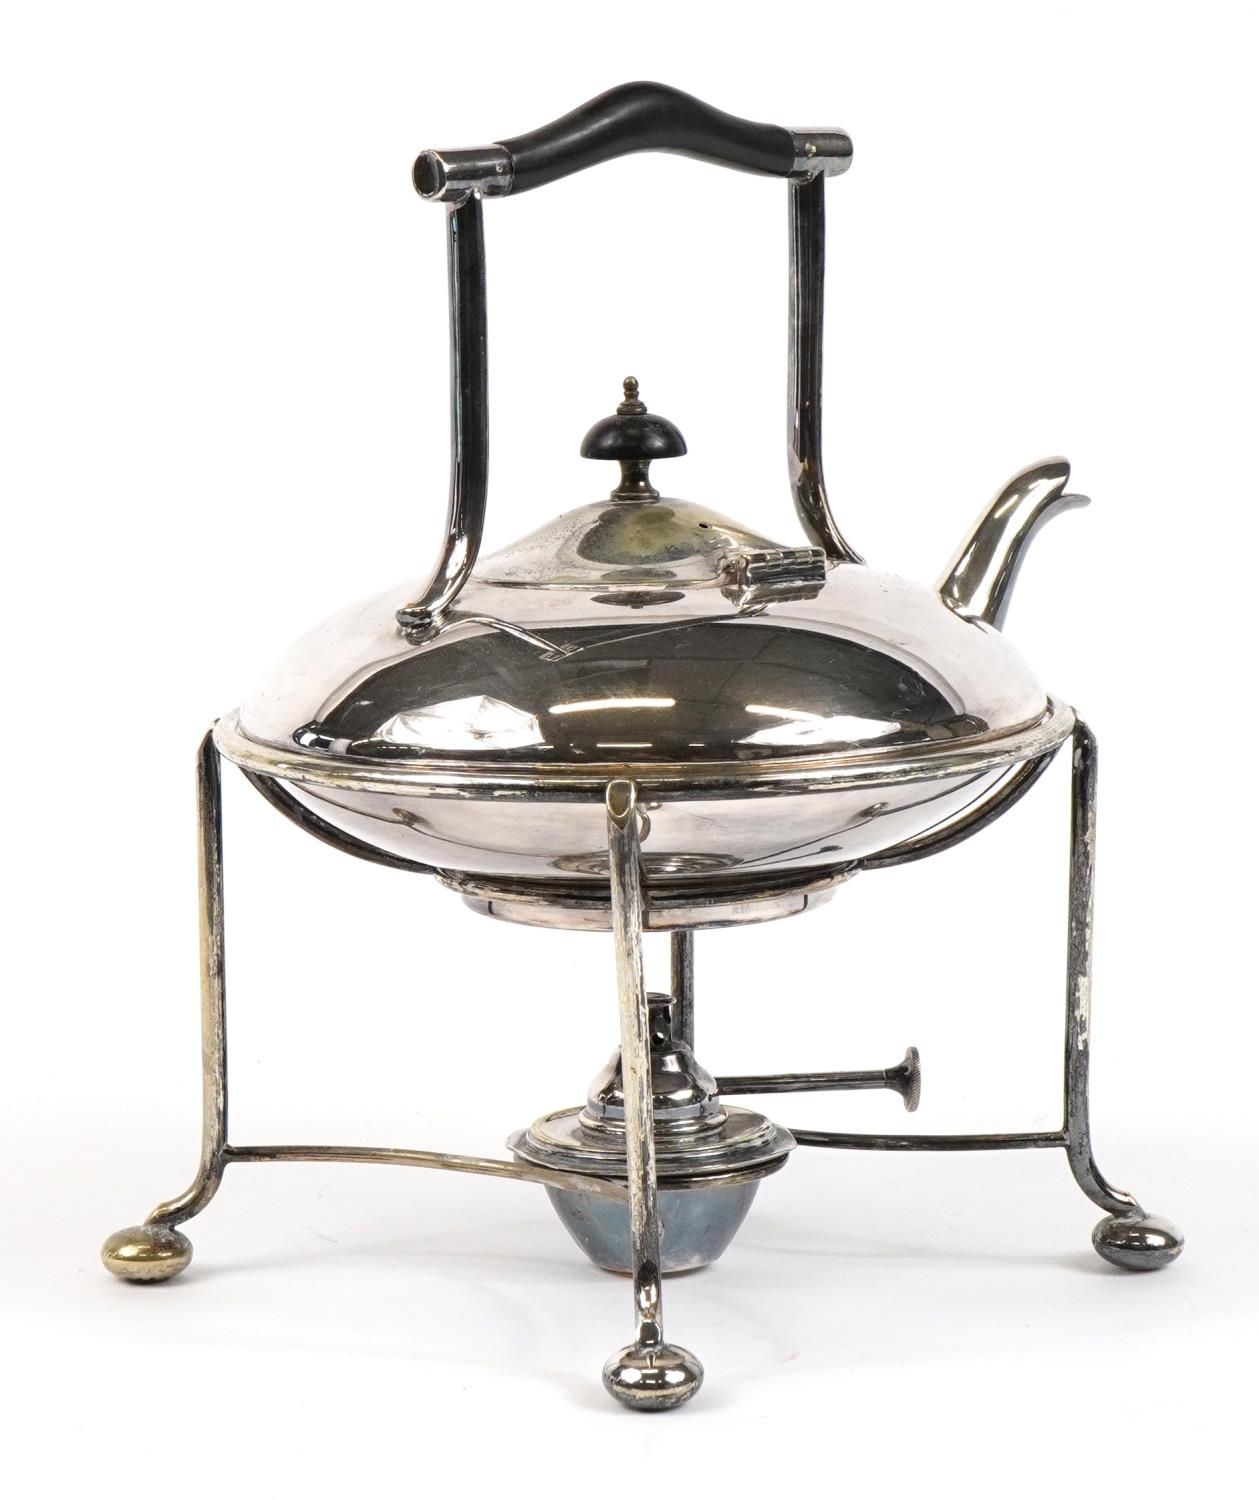 Art Deco silver plated teapot on stand with burner and ebonised mounts, 30cm high - Image 2 of 4